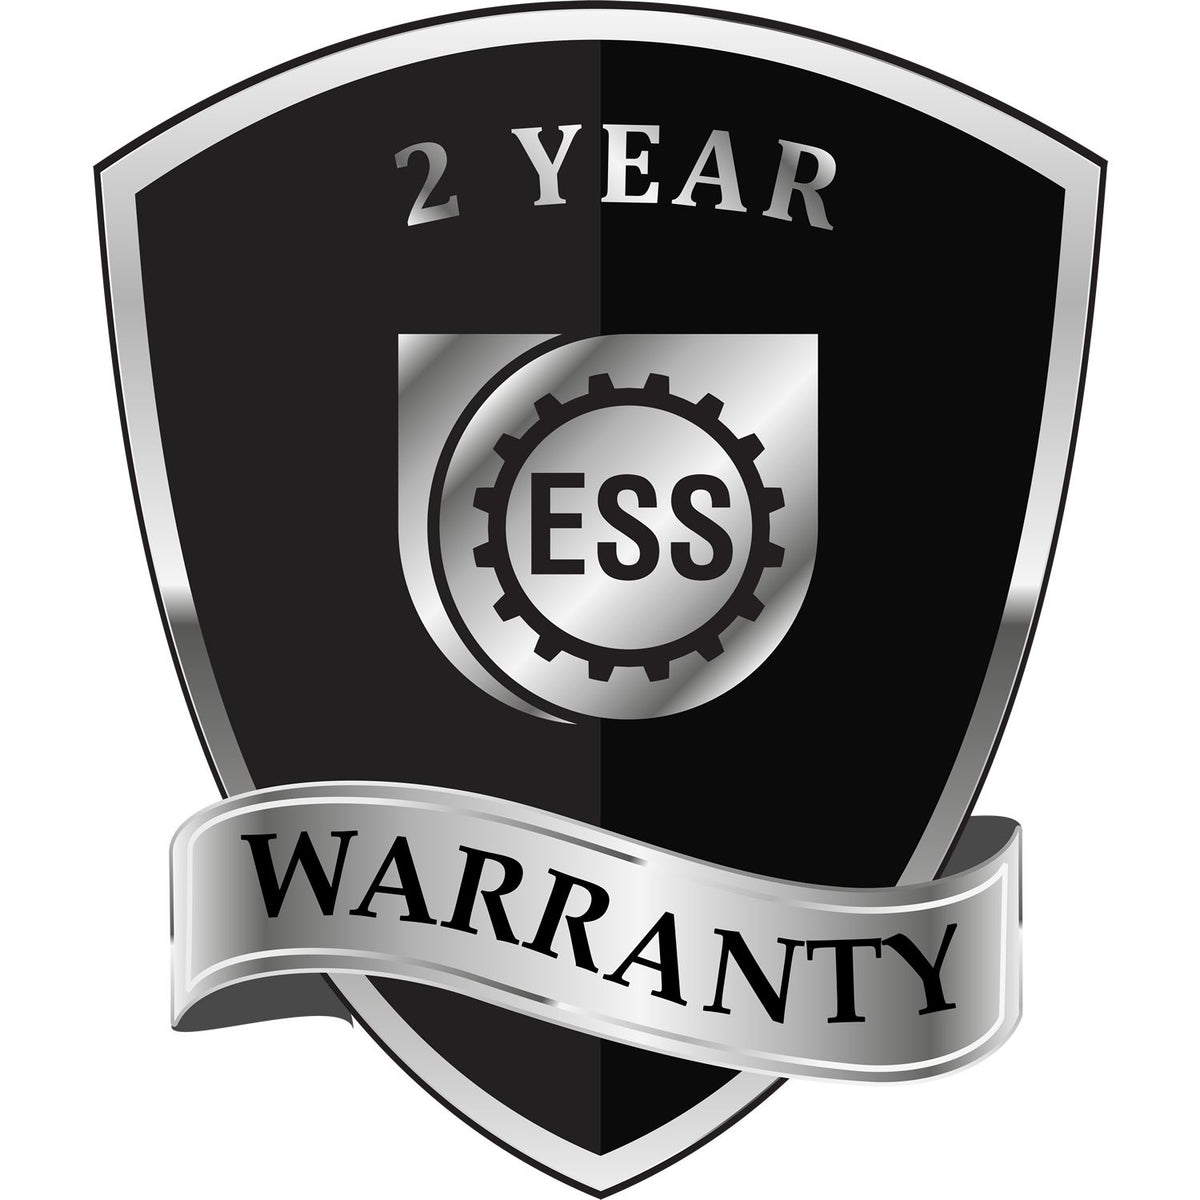 A black and silver badge or emblem showing warranty information for the Soft Wyoming Professional Geologist Seal